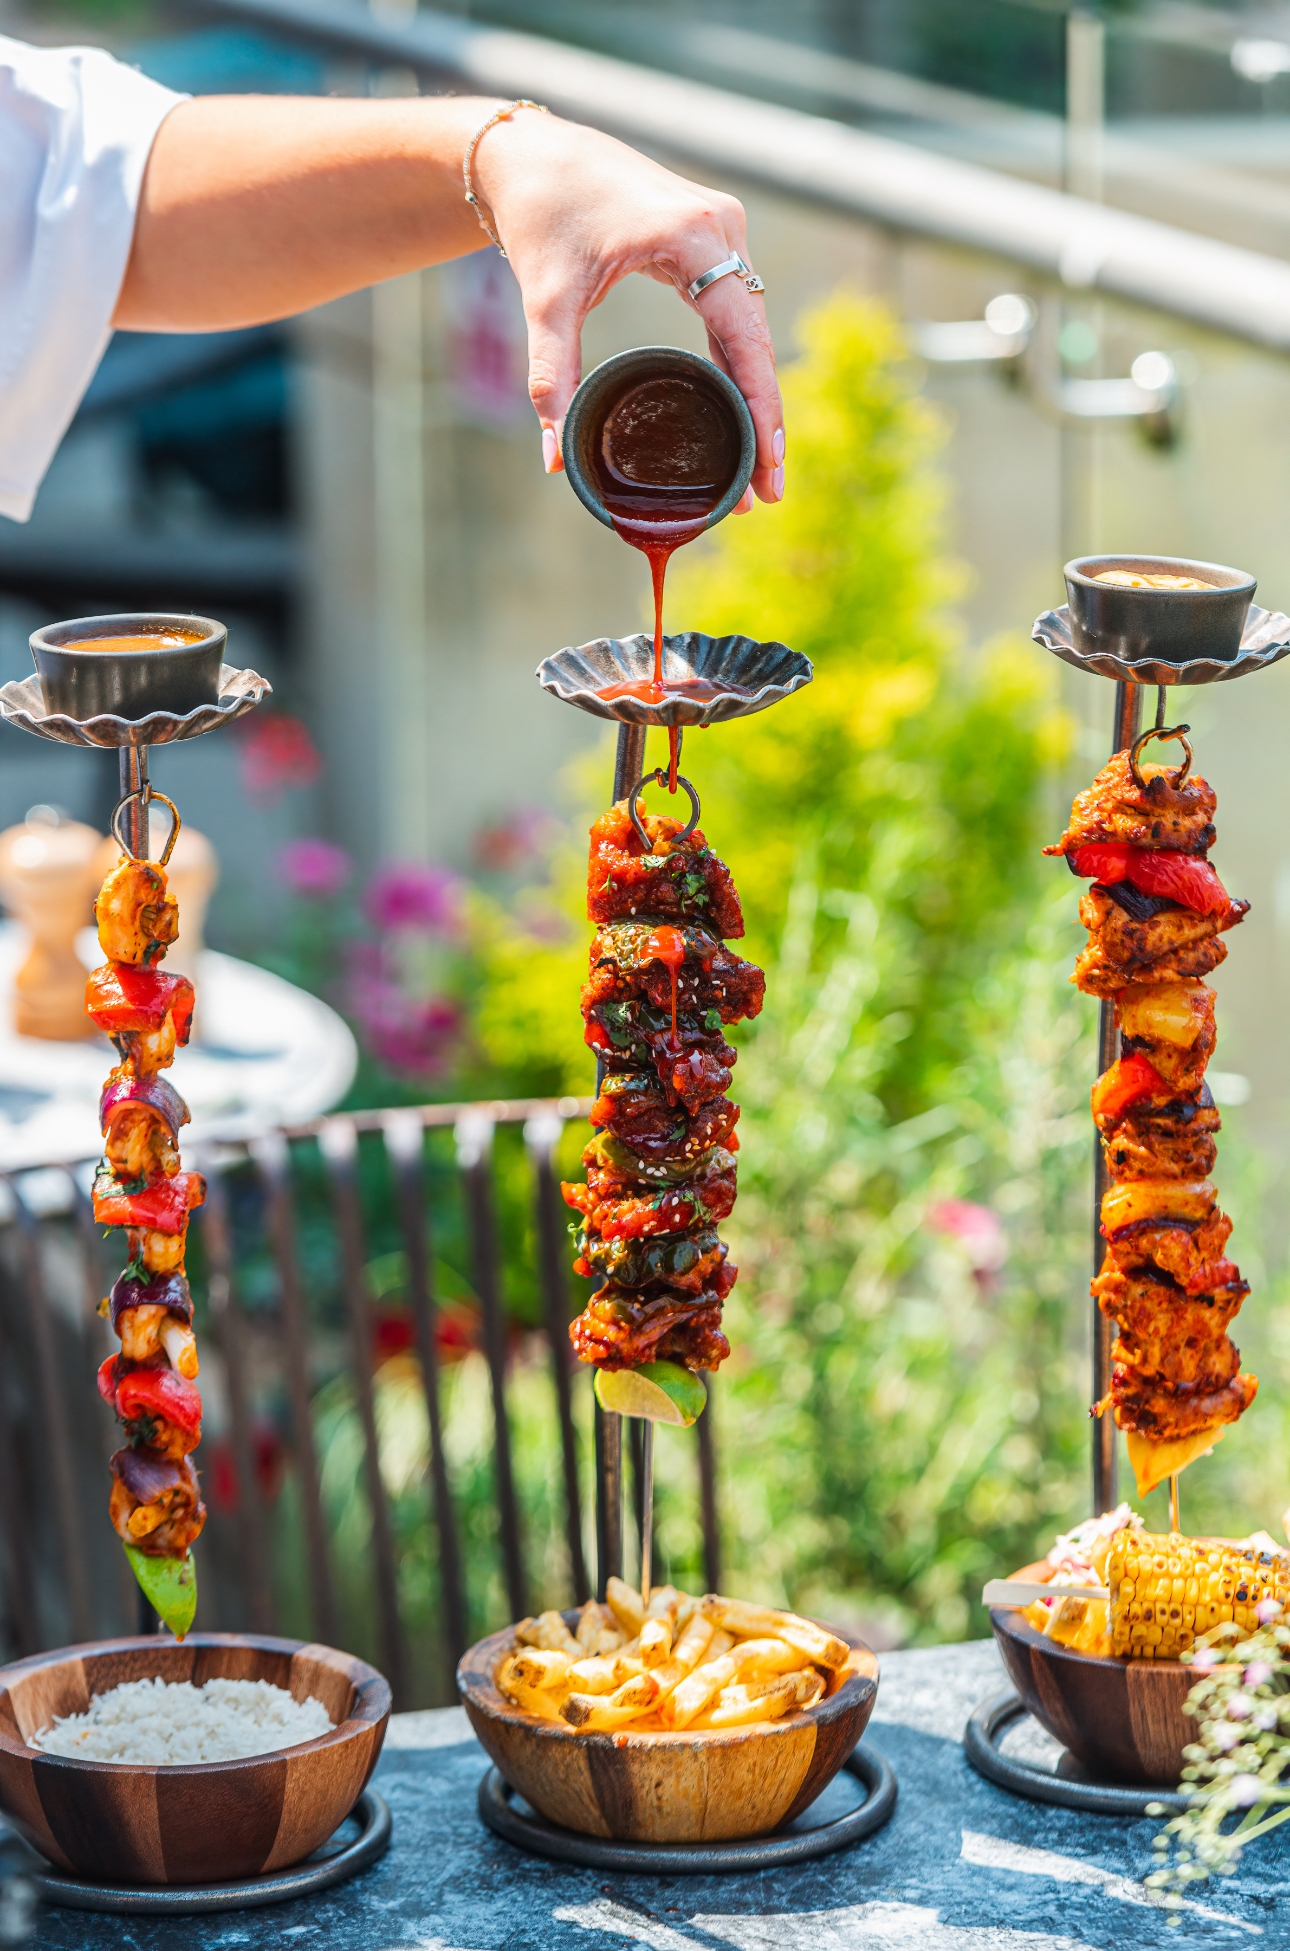 The Botanist launches summer menu packed with vegan options and these hanging kebabs